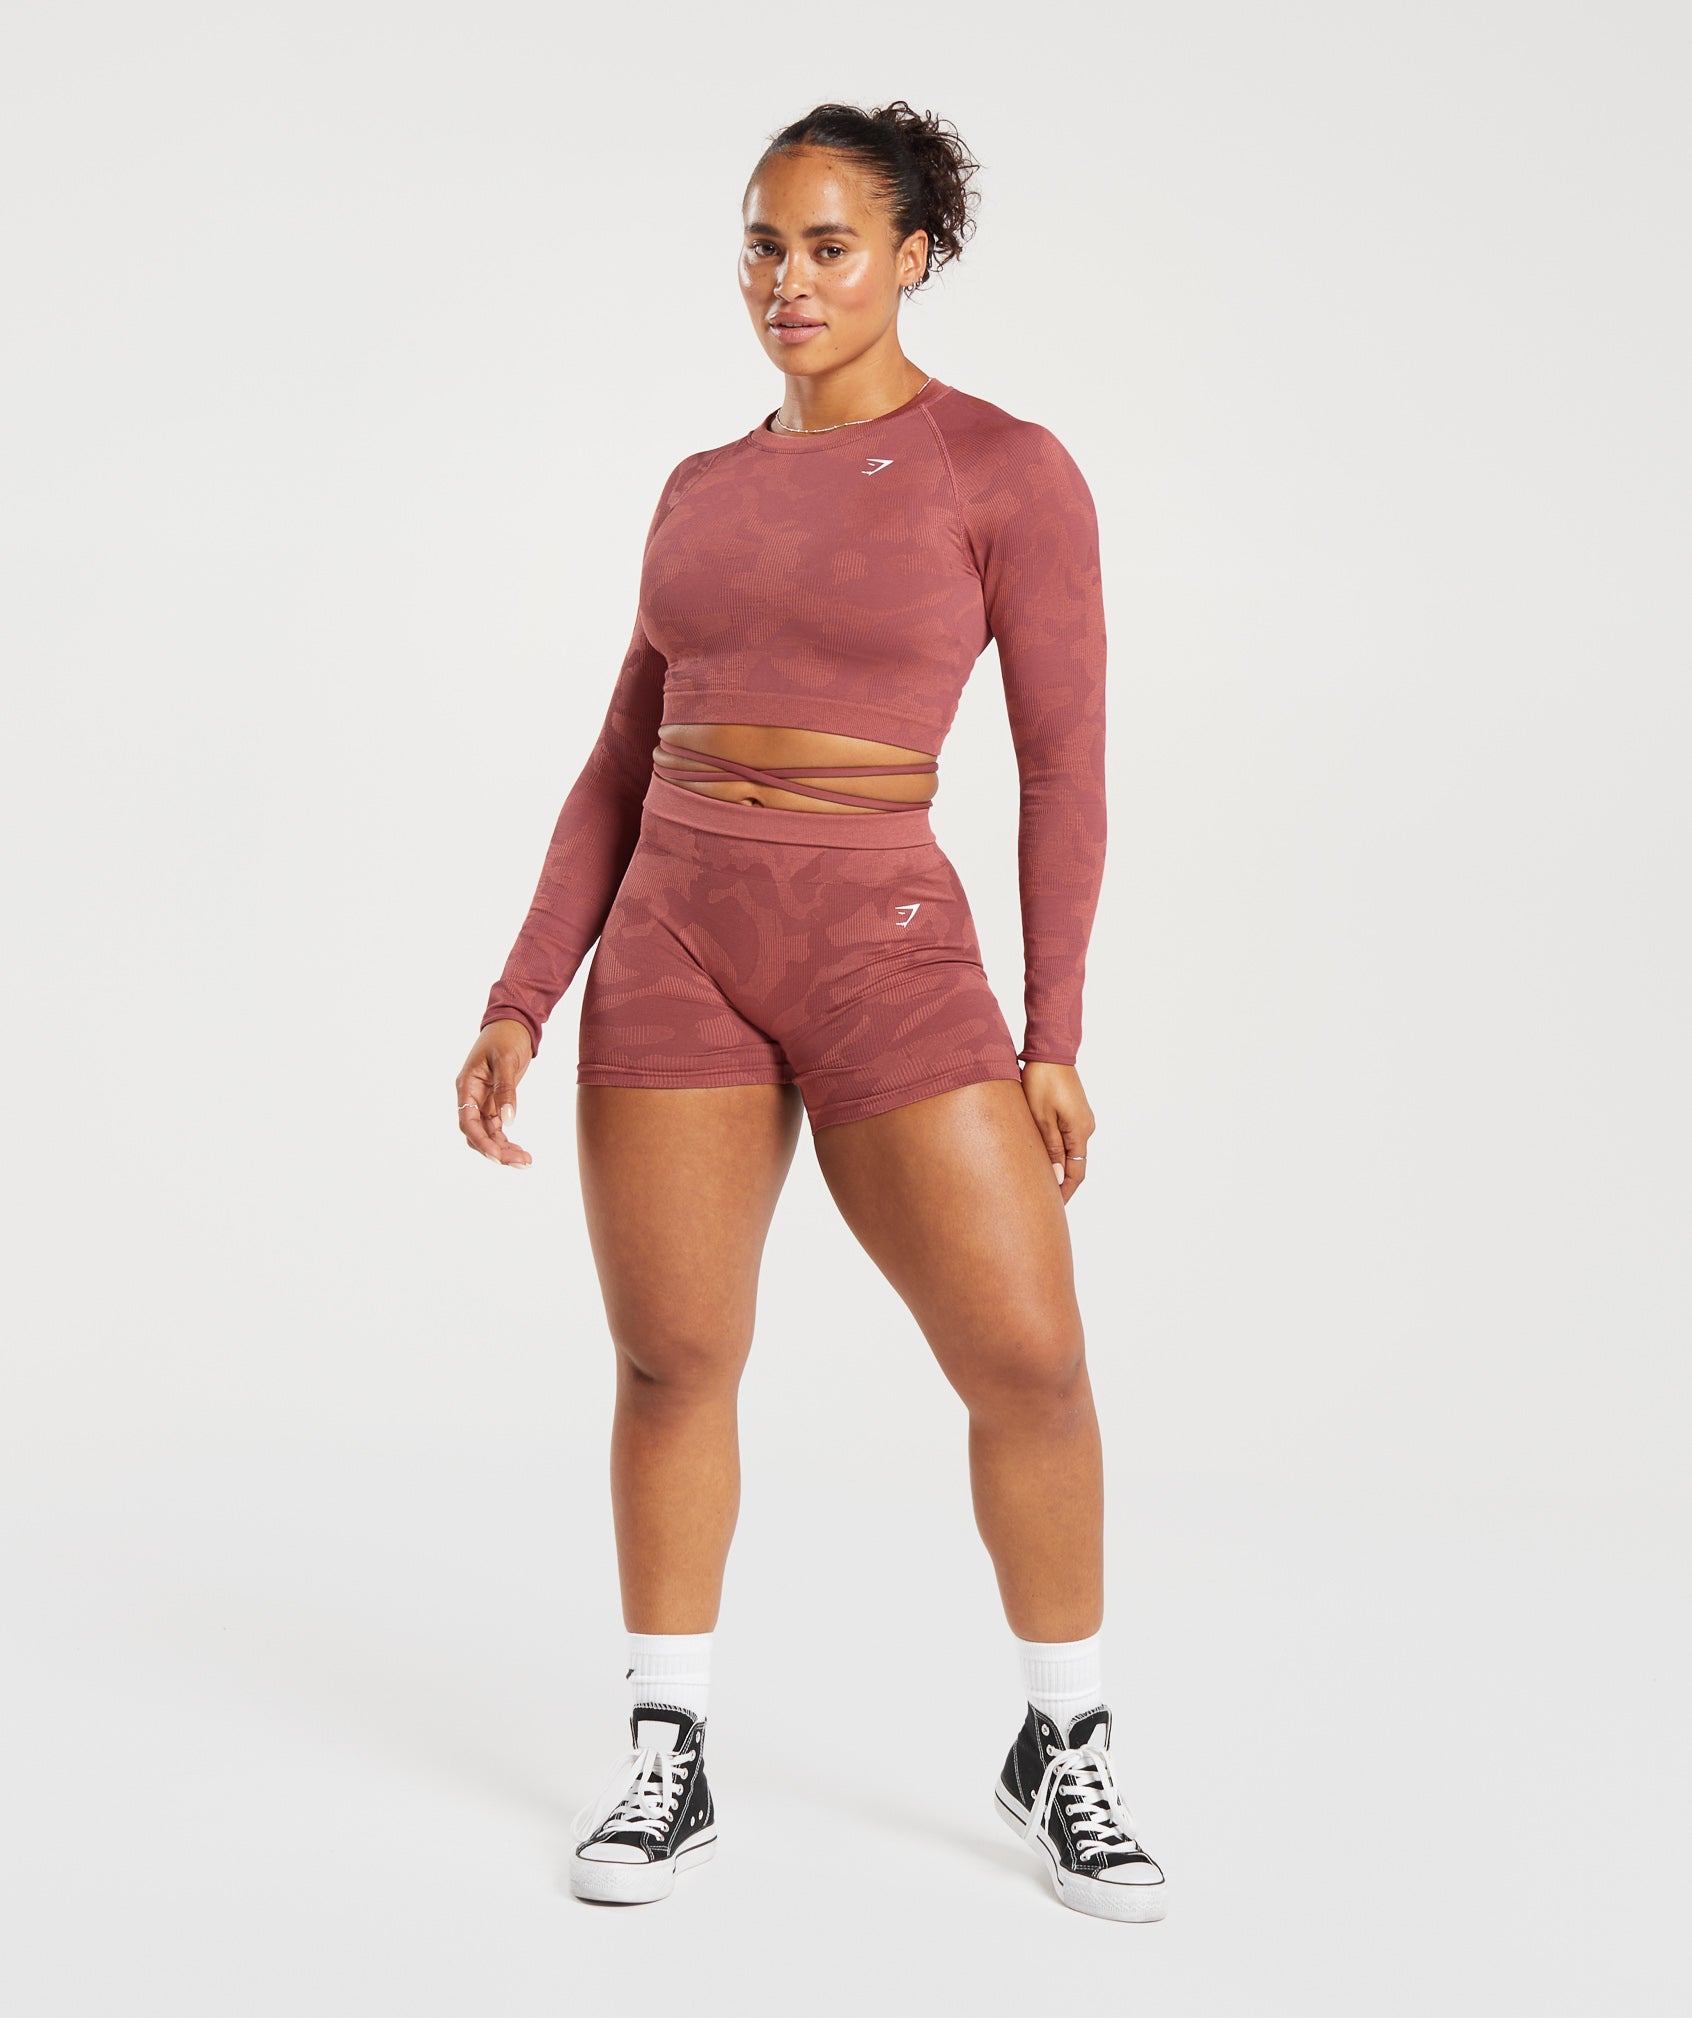 Adapt Camo Seamless Ribbed Long Sleeve Crop Top in Soft Berry/Sunbaked Pink - view 4